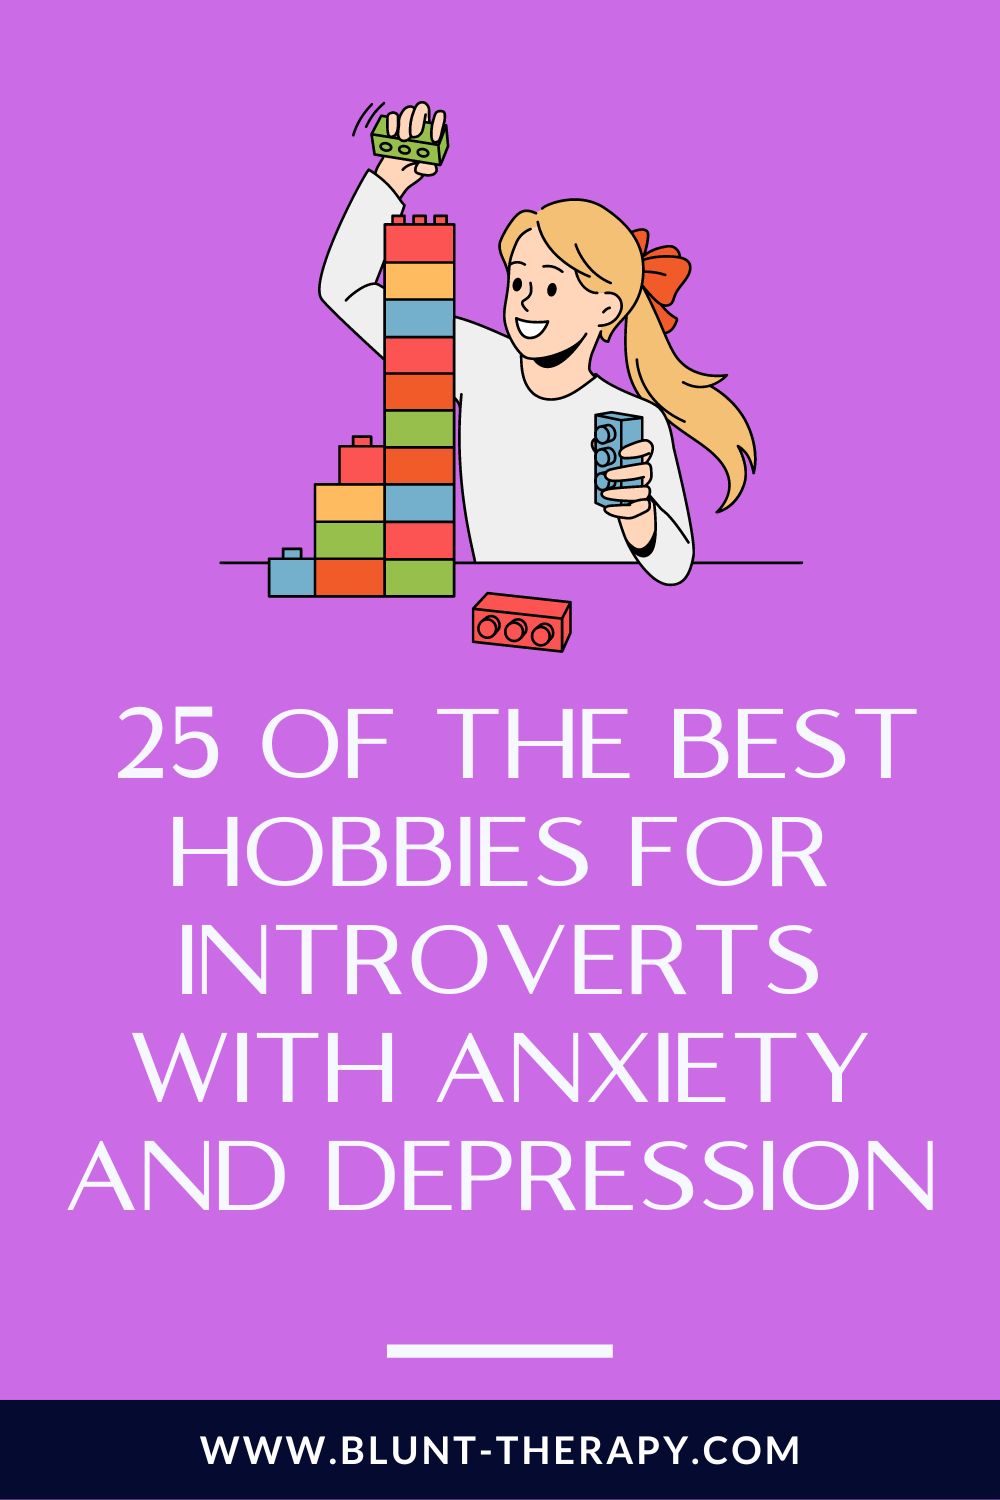  25 of the Best Hobbies For Introverts With Anxiety and Depression